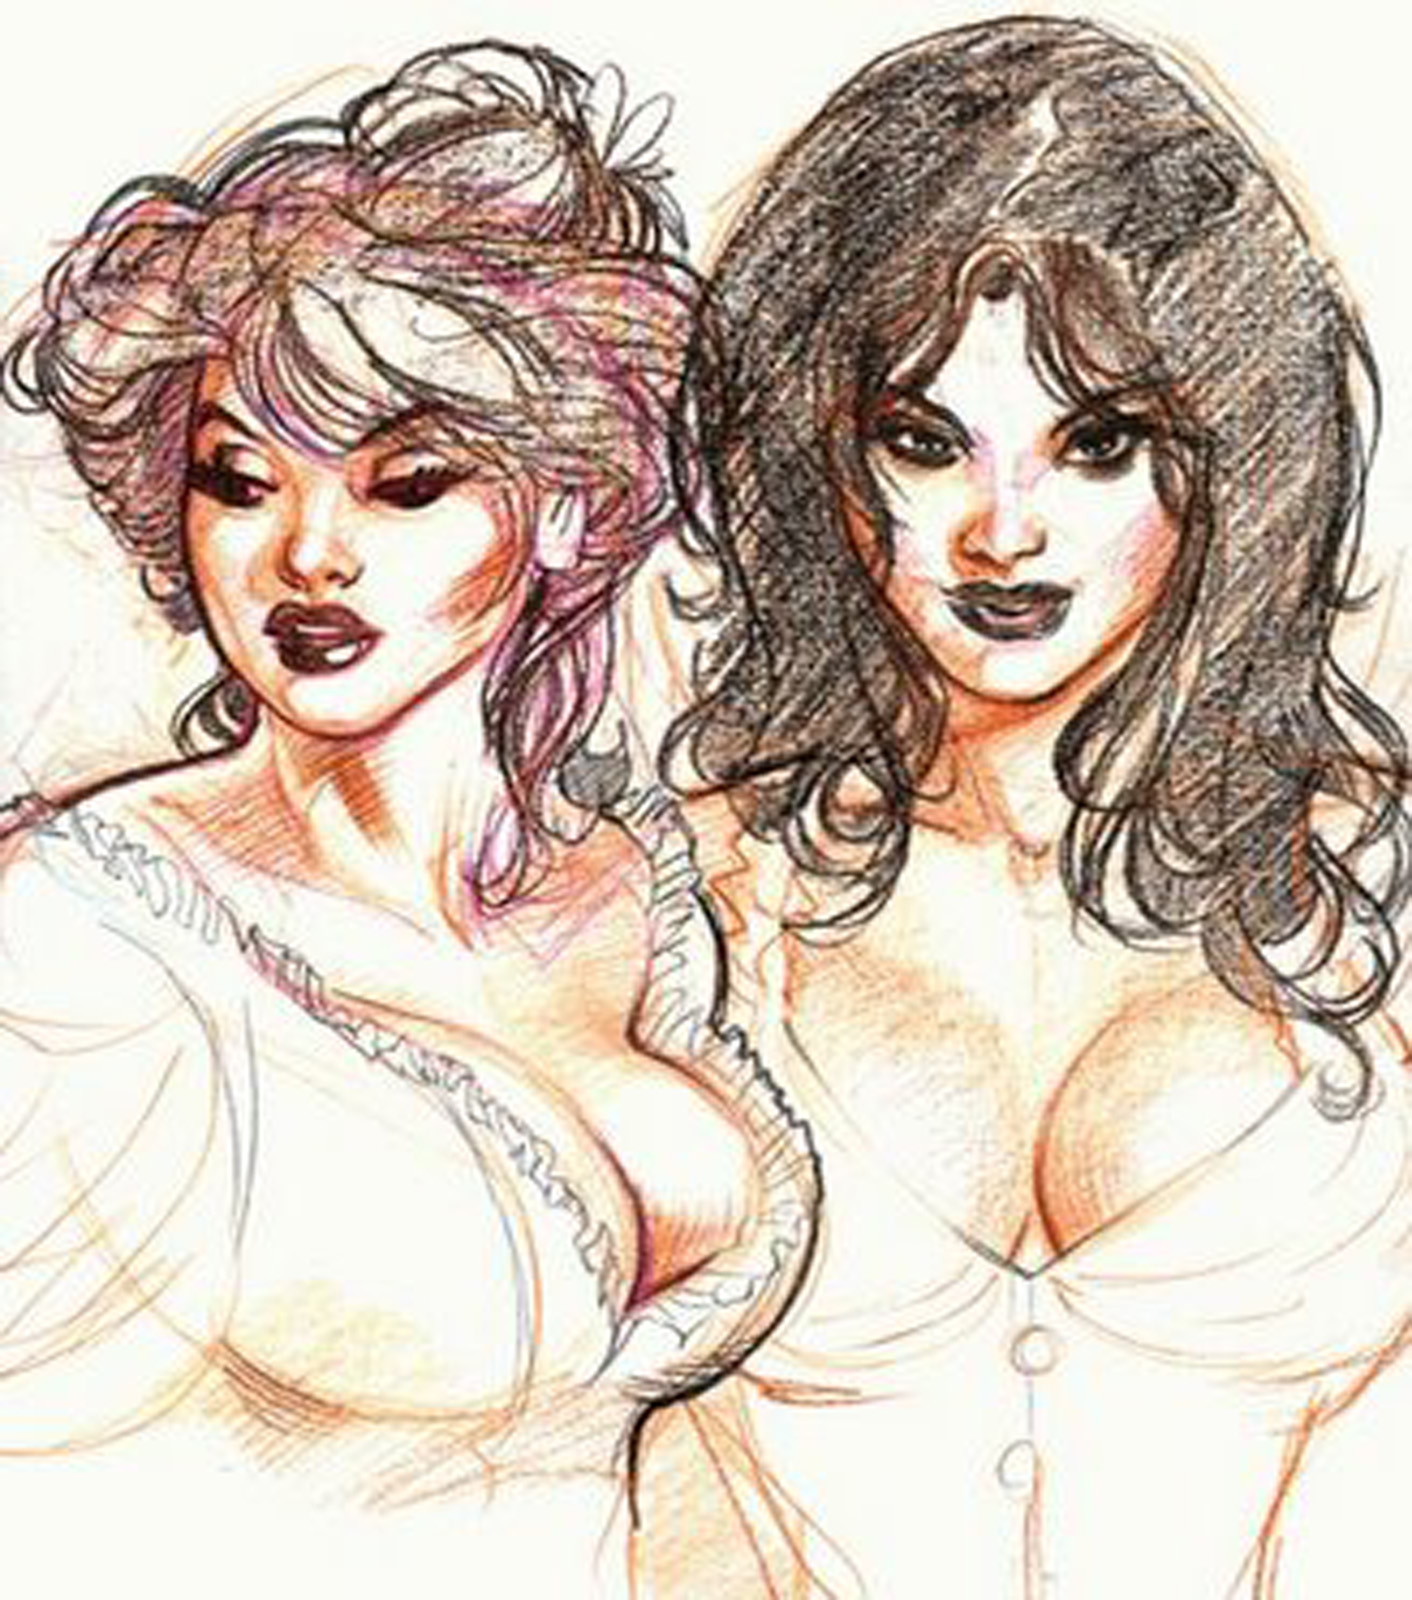 pinup+2+by+terry+dodson+steampunk+victorian+theme+costume+dress+busty+sexy+drawing+pencils.jpg